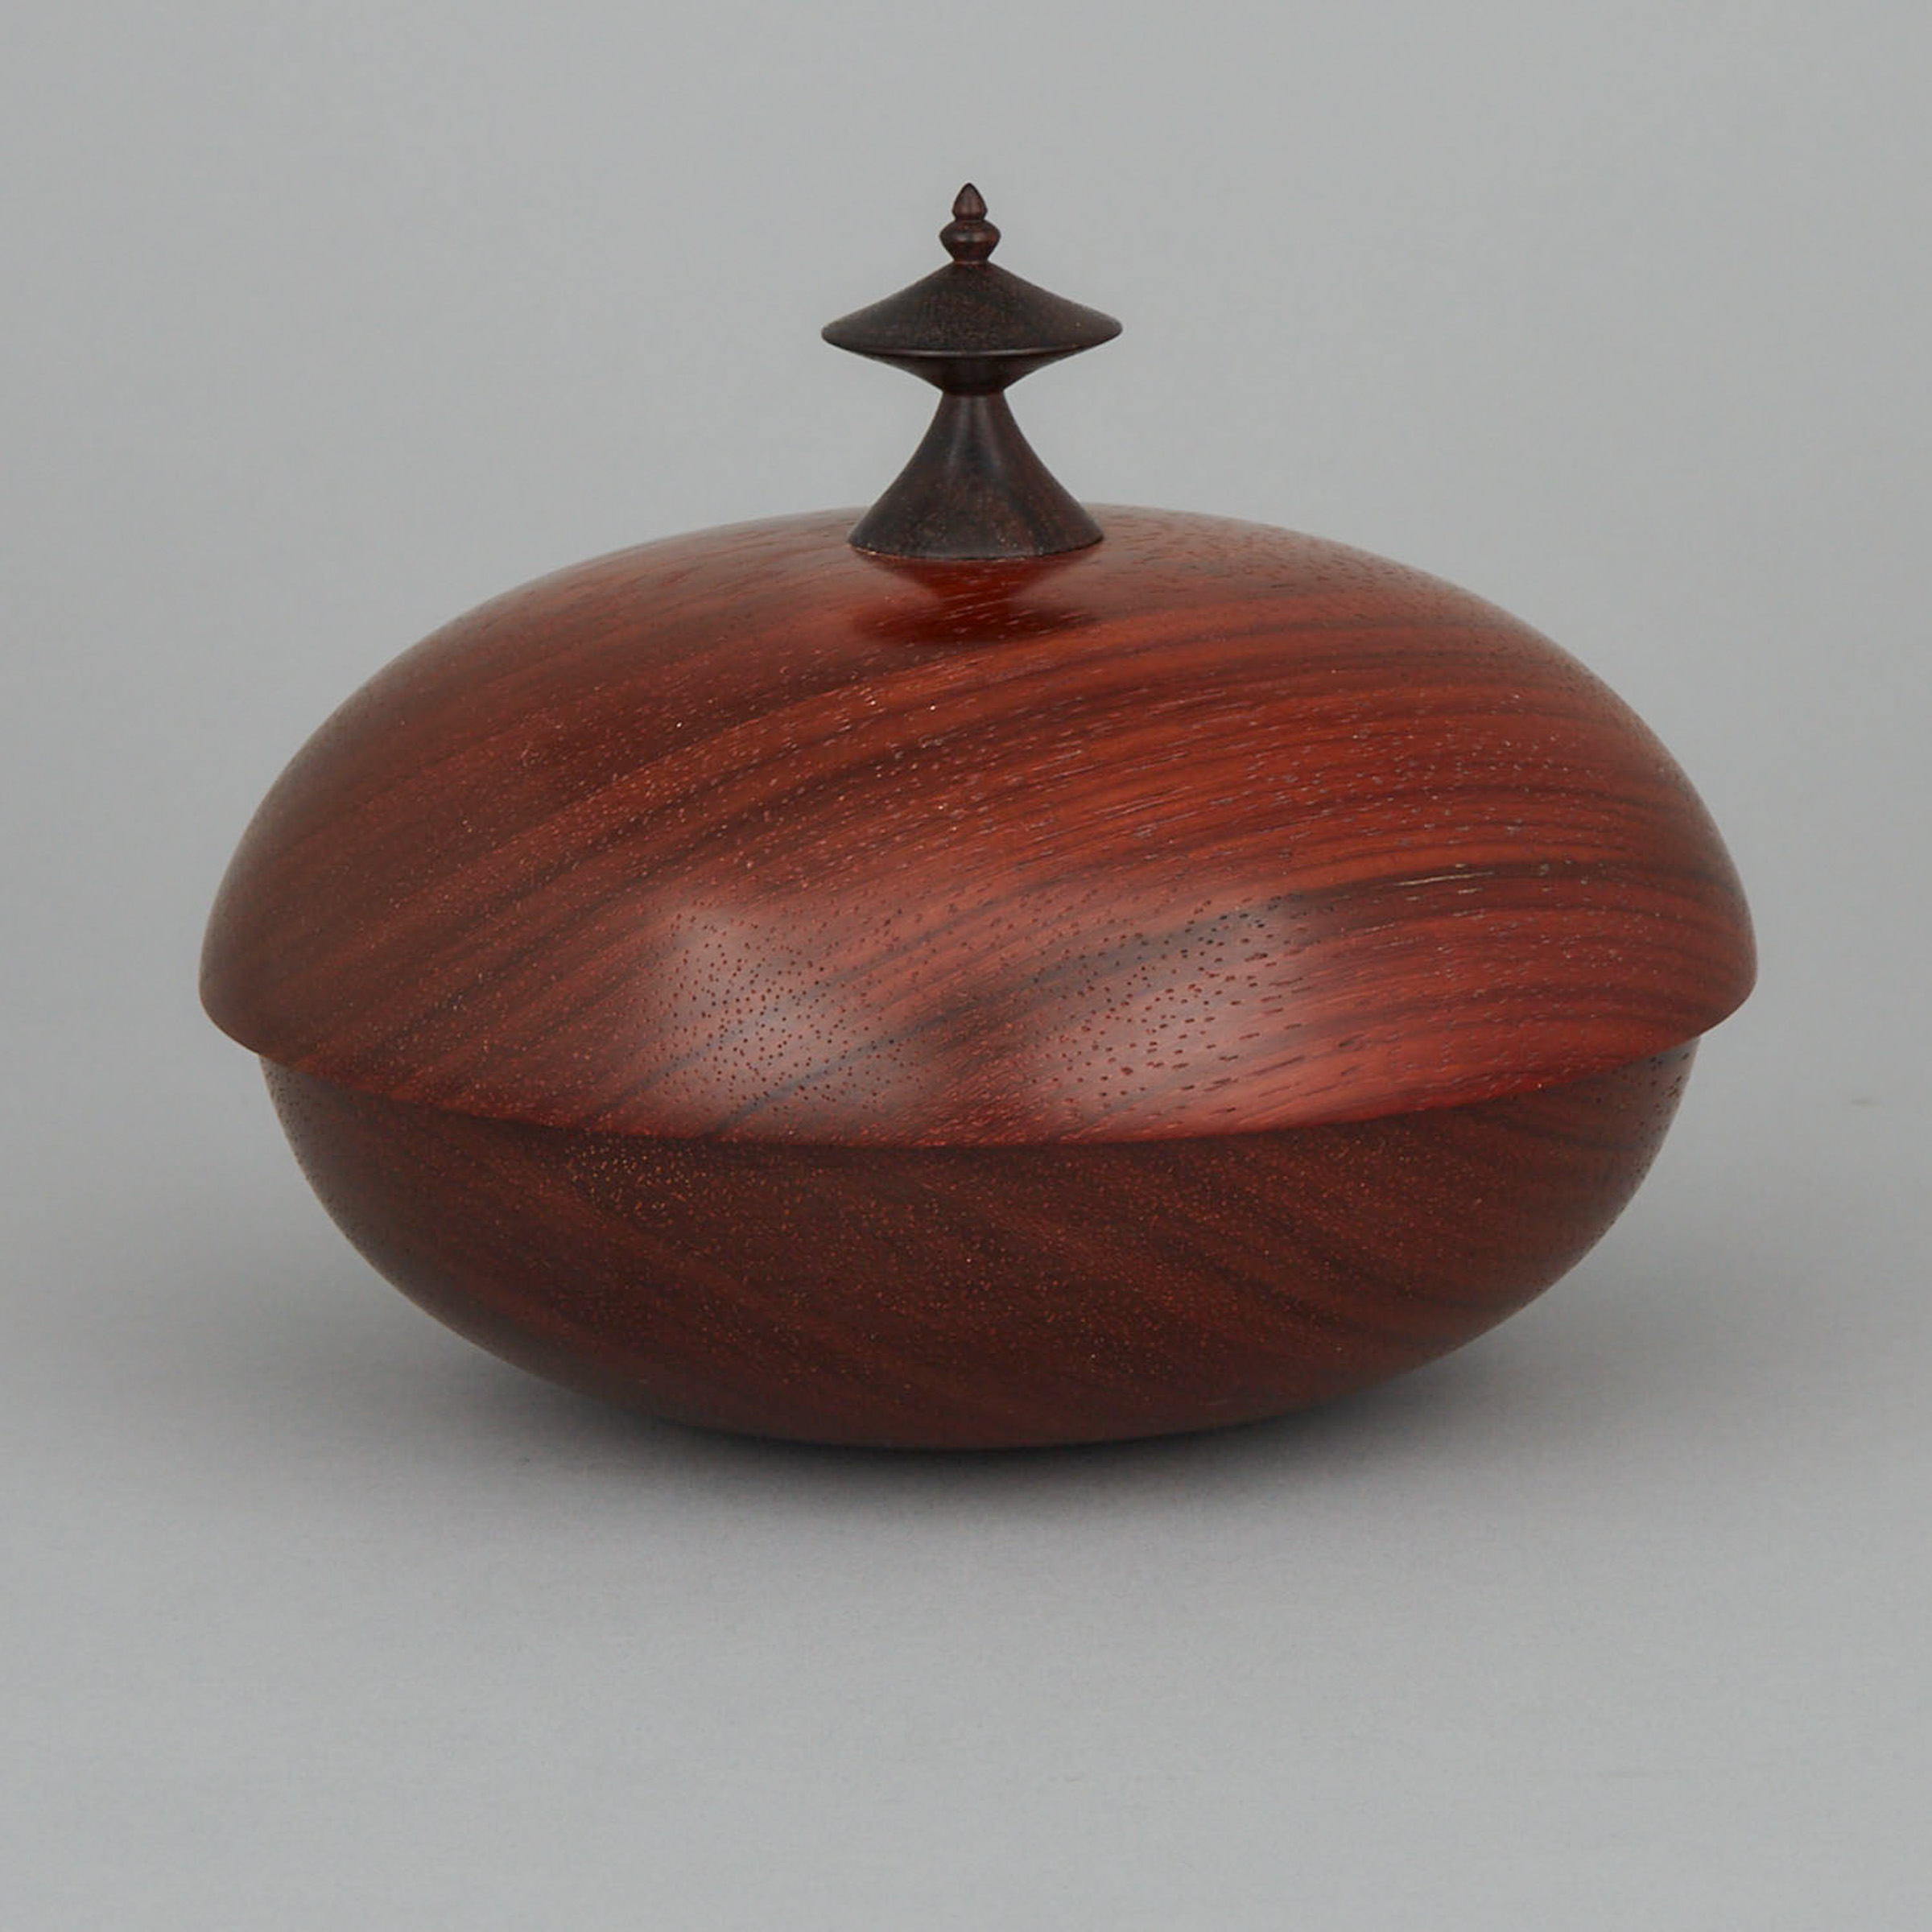 Contemporary Turned Padauk and Cocobolo Bowl by V. Lebert, c.2000